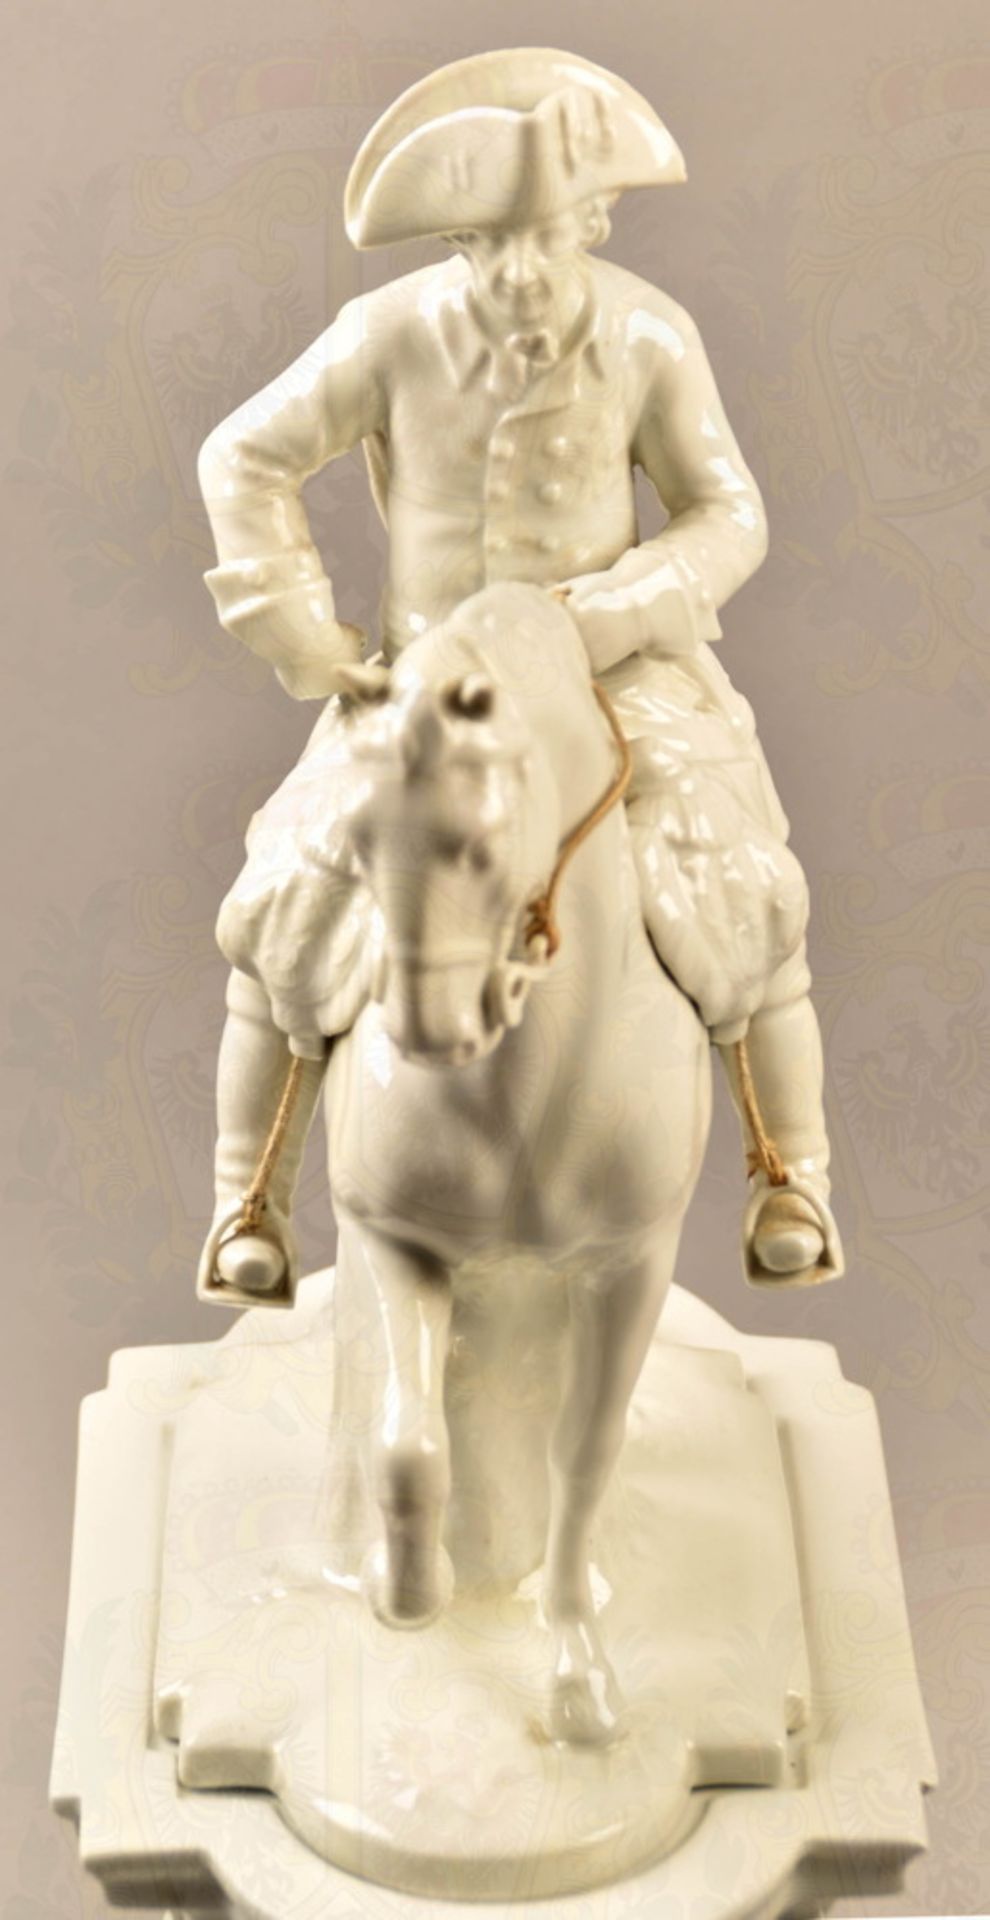 Porcelain equestrian statuette Frederick the Great - Image 2 of 6